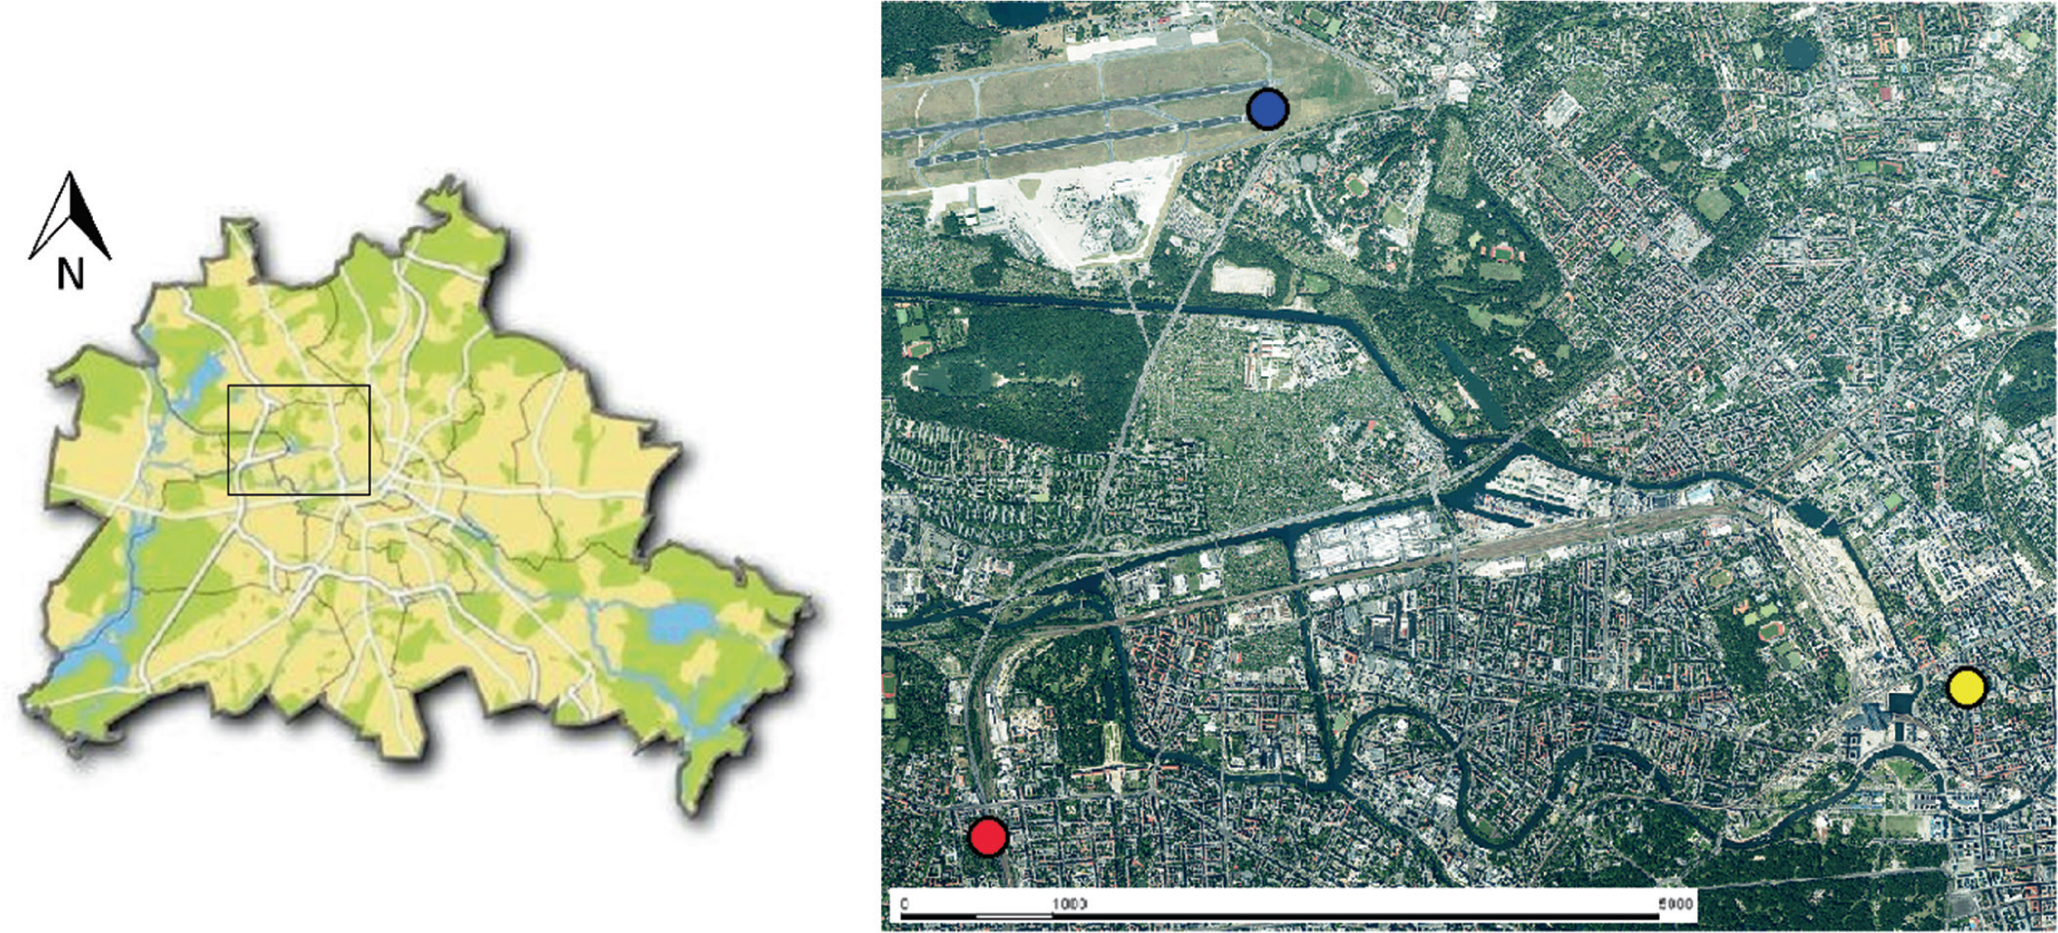 Birch Grass And Mugwort Pollen Concentrations And Intradiurnal Patterns At Two Different Urban Sites In Berlin Germany Springerlink